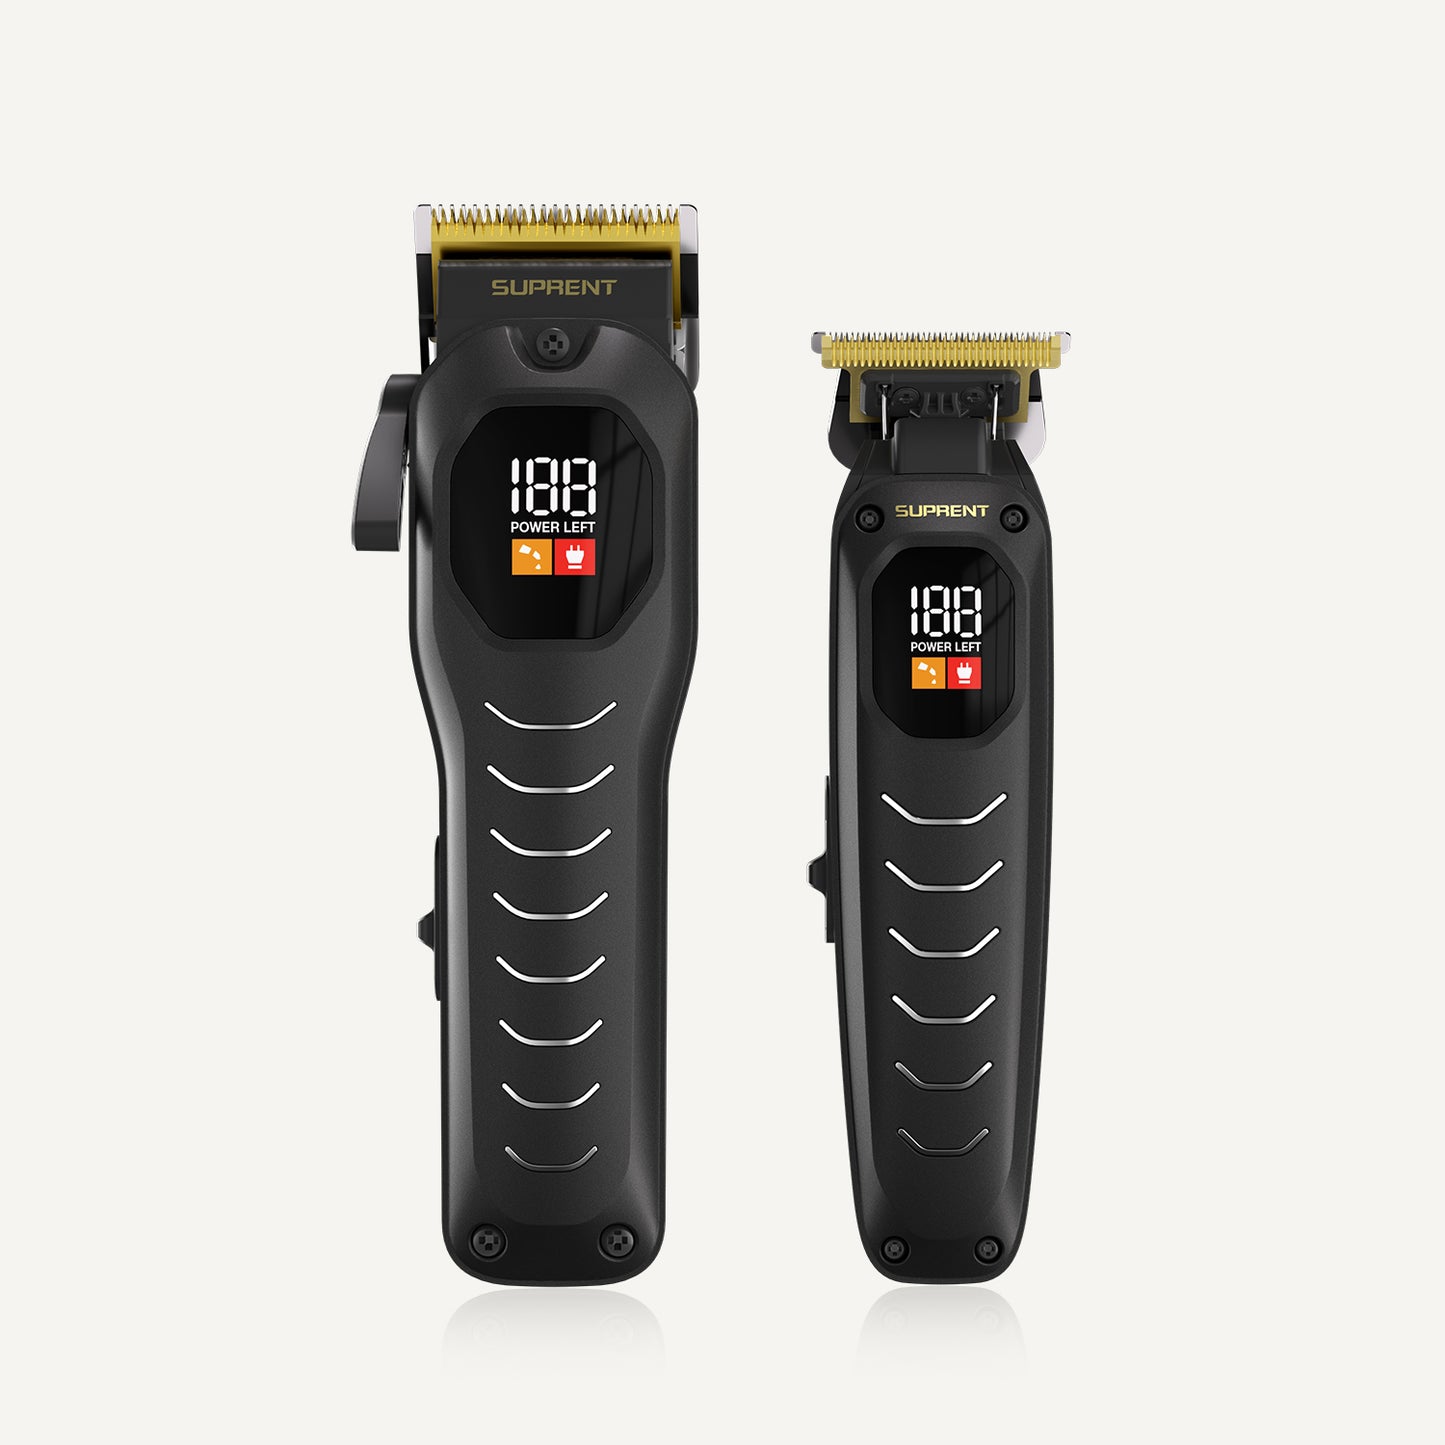 The Black Scorpion Professional Clipper and Trimmer Set - HC226BX